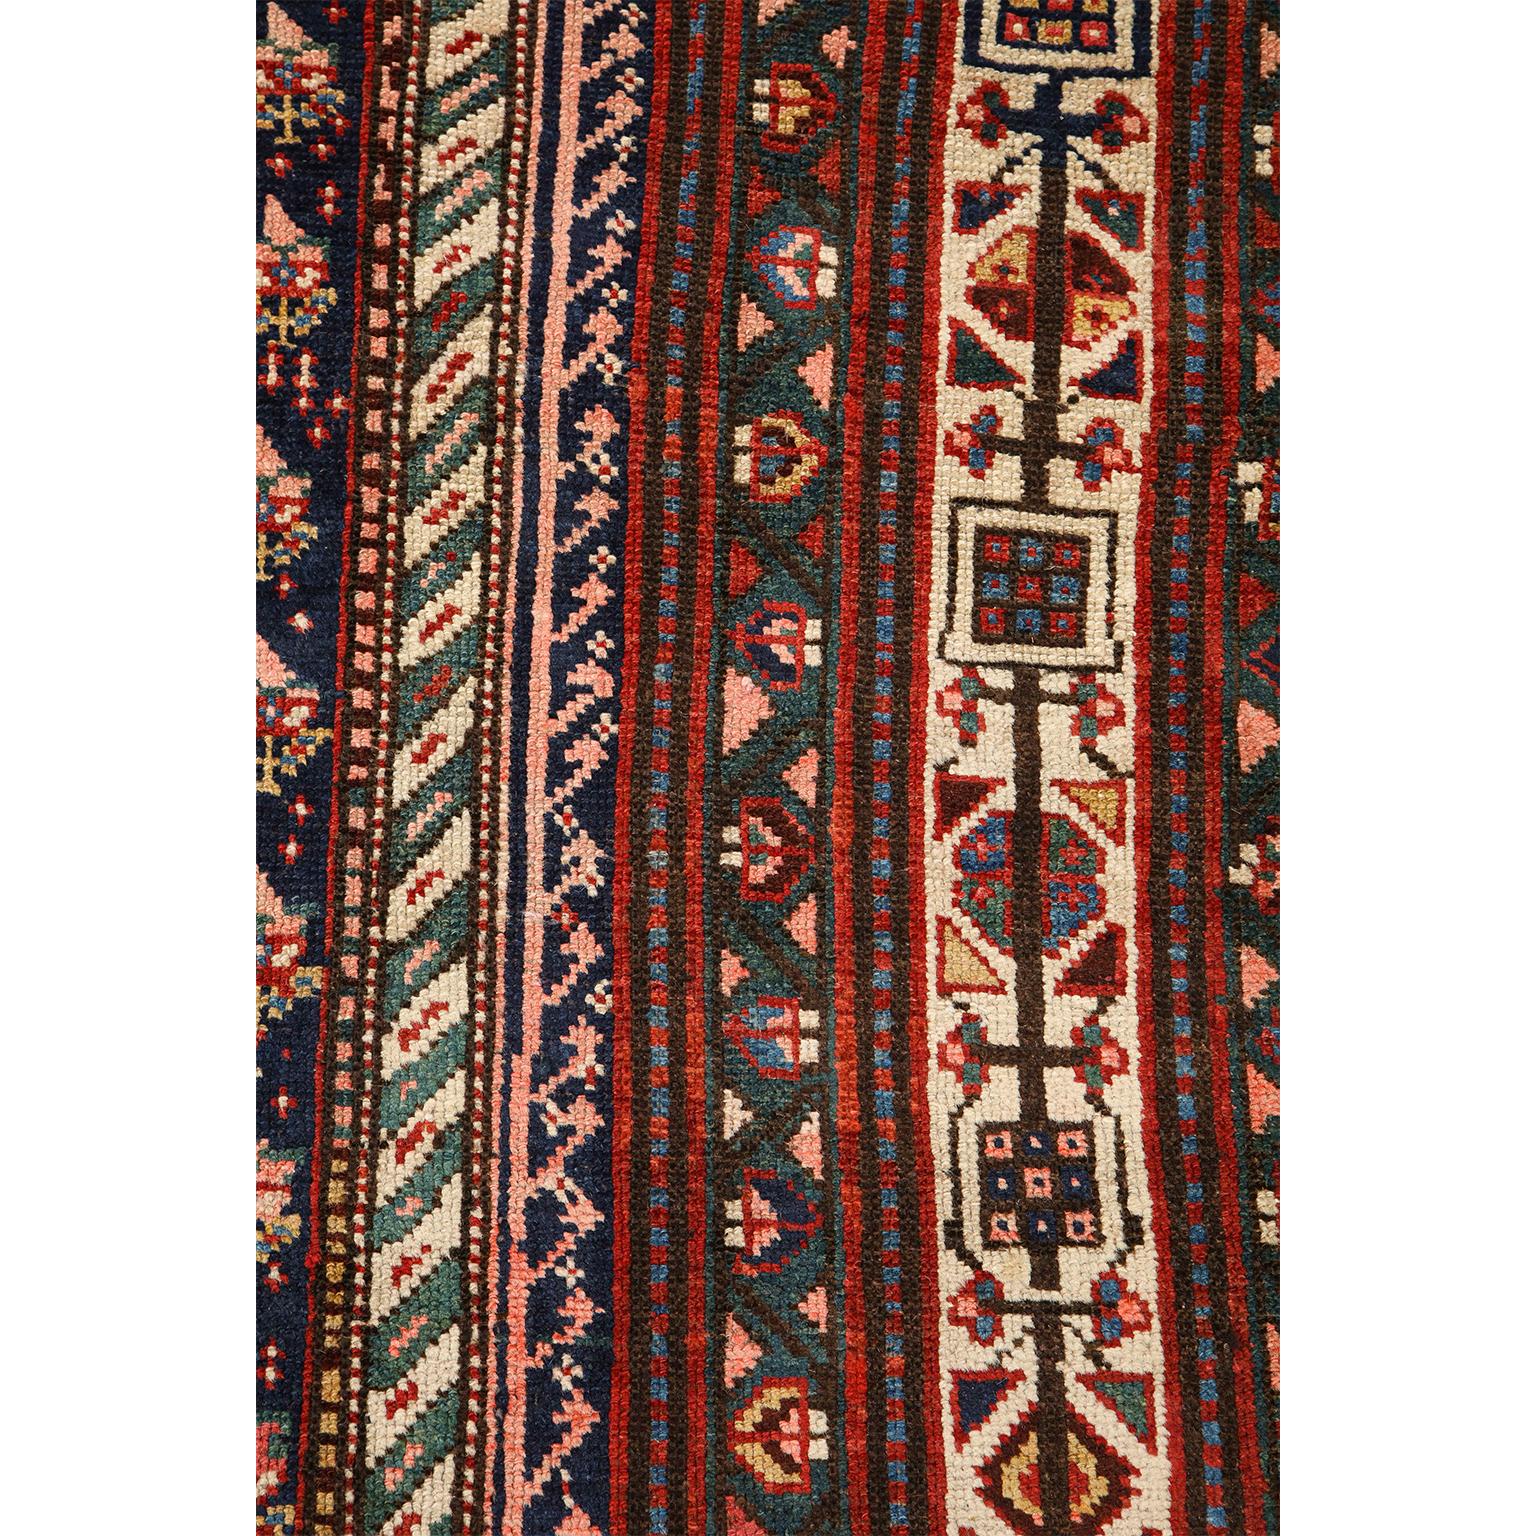 Antique 1900s Wool Persian Senneh Rug, 5' x 9' For Sale 5